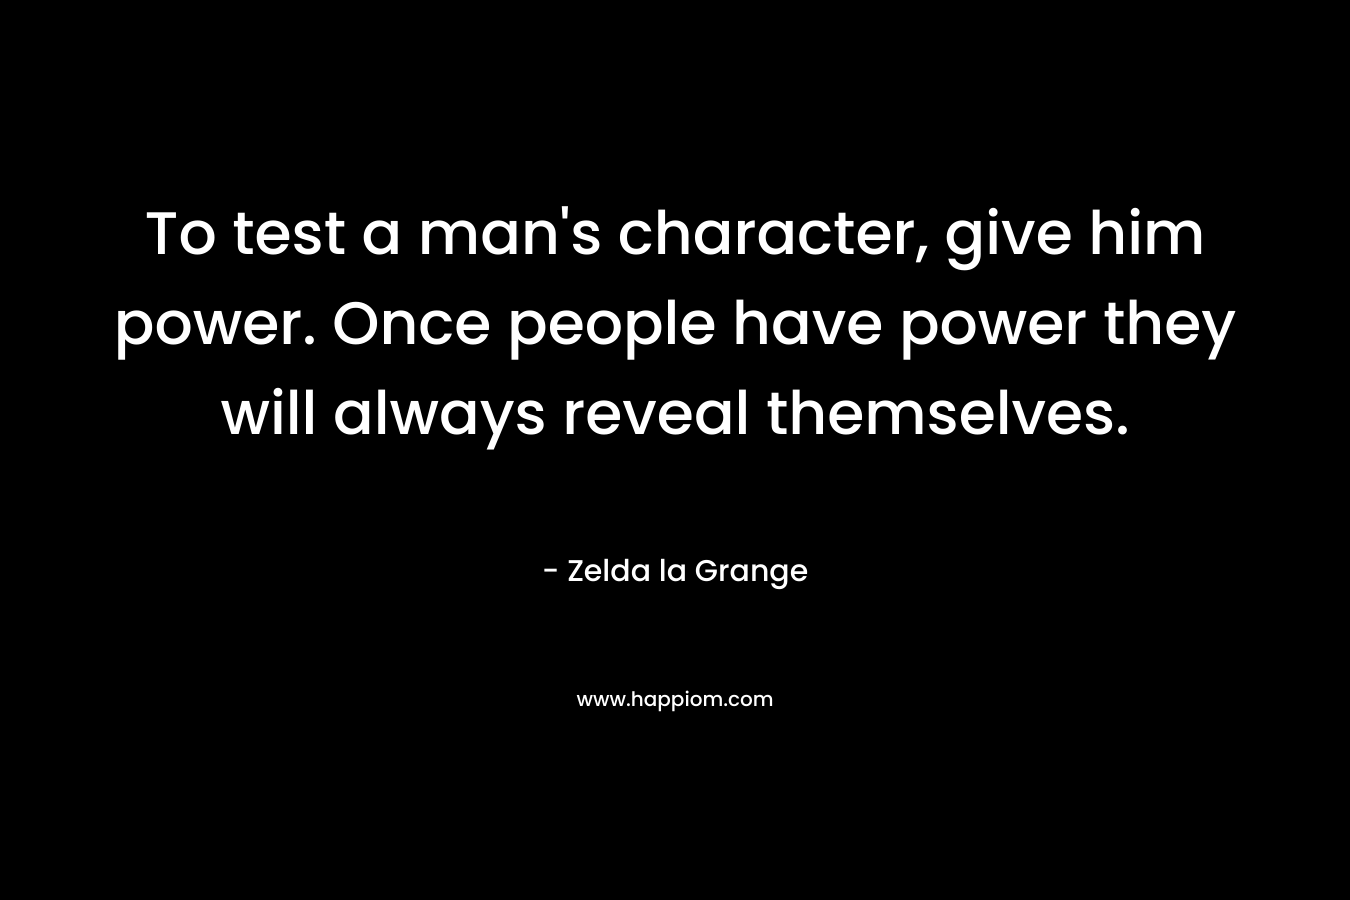 To test a man's character, give him power. Once people have power they will always reveal themselves.